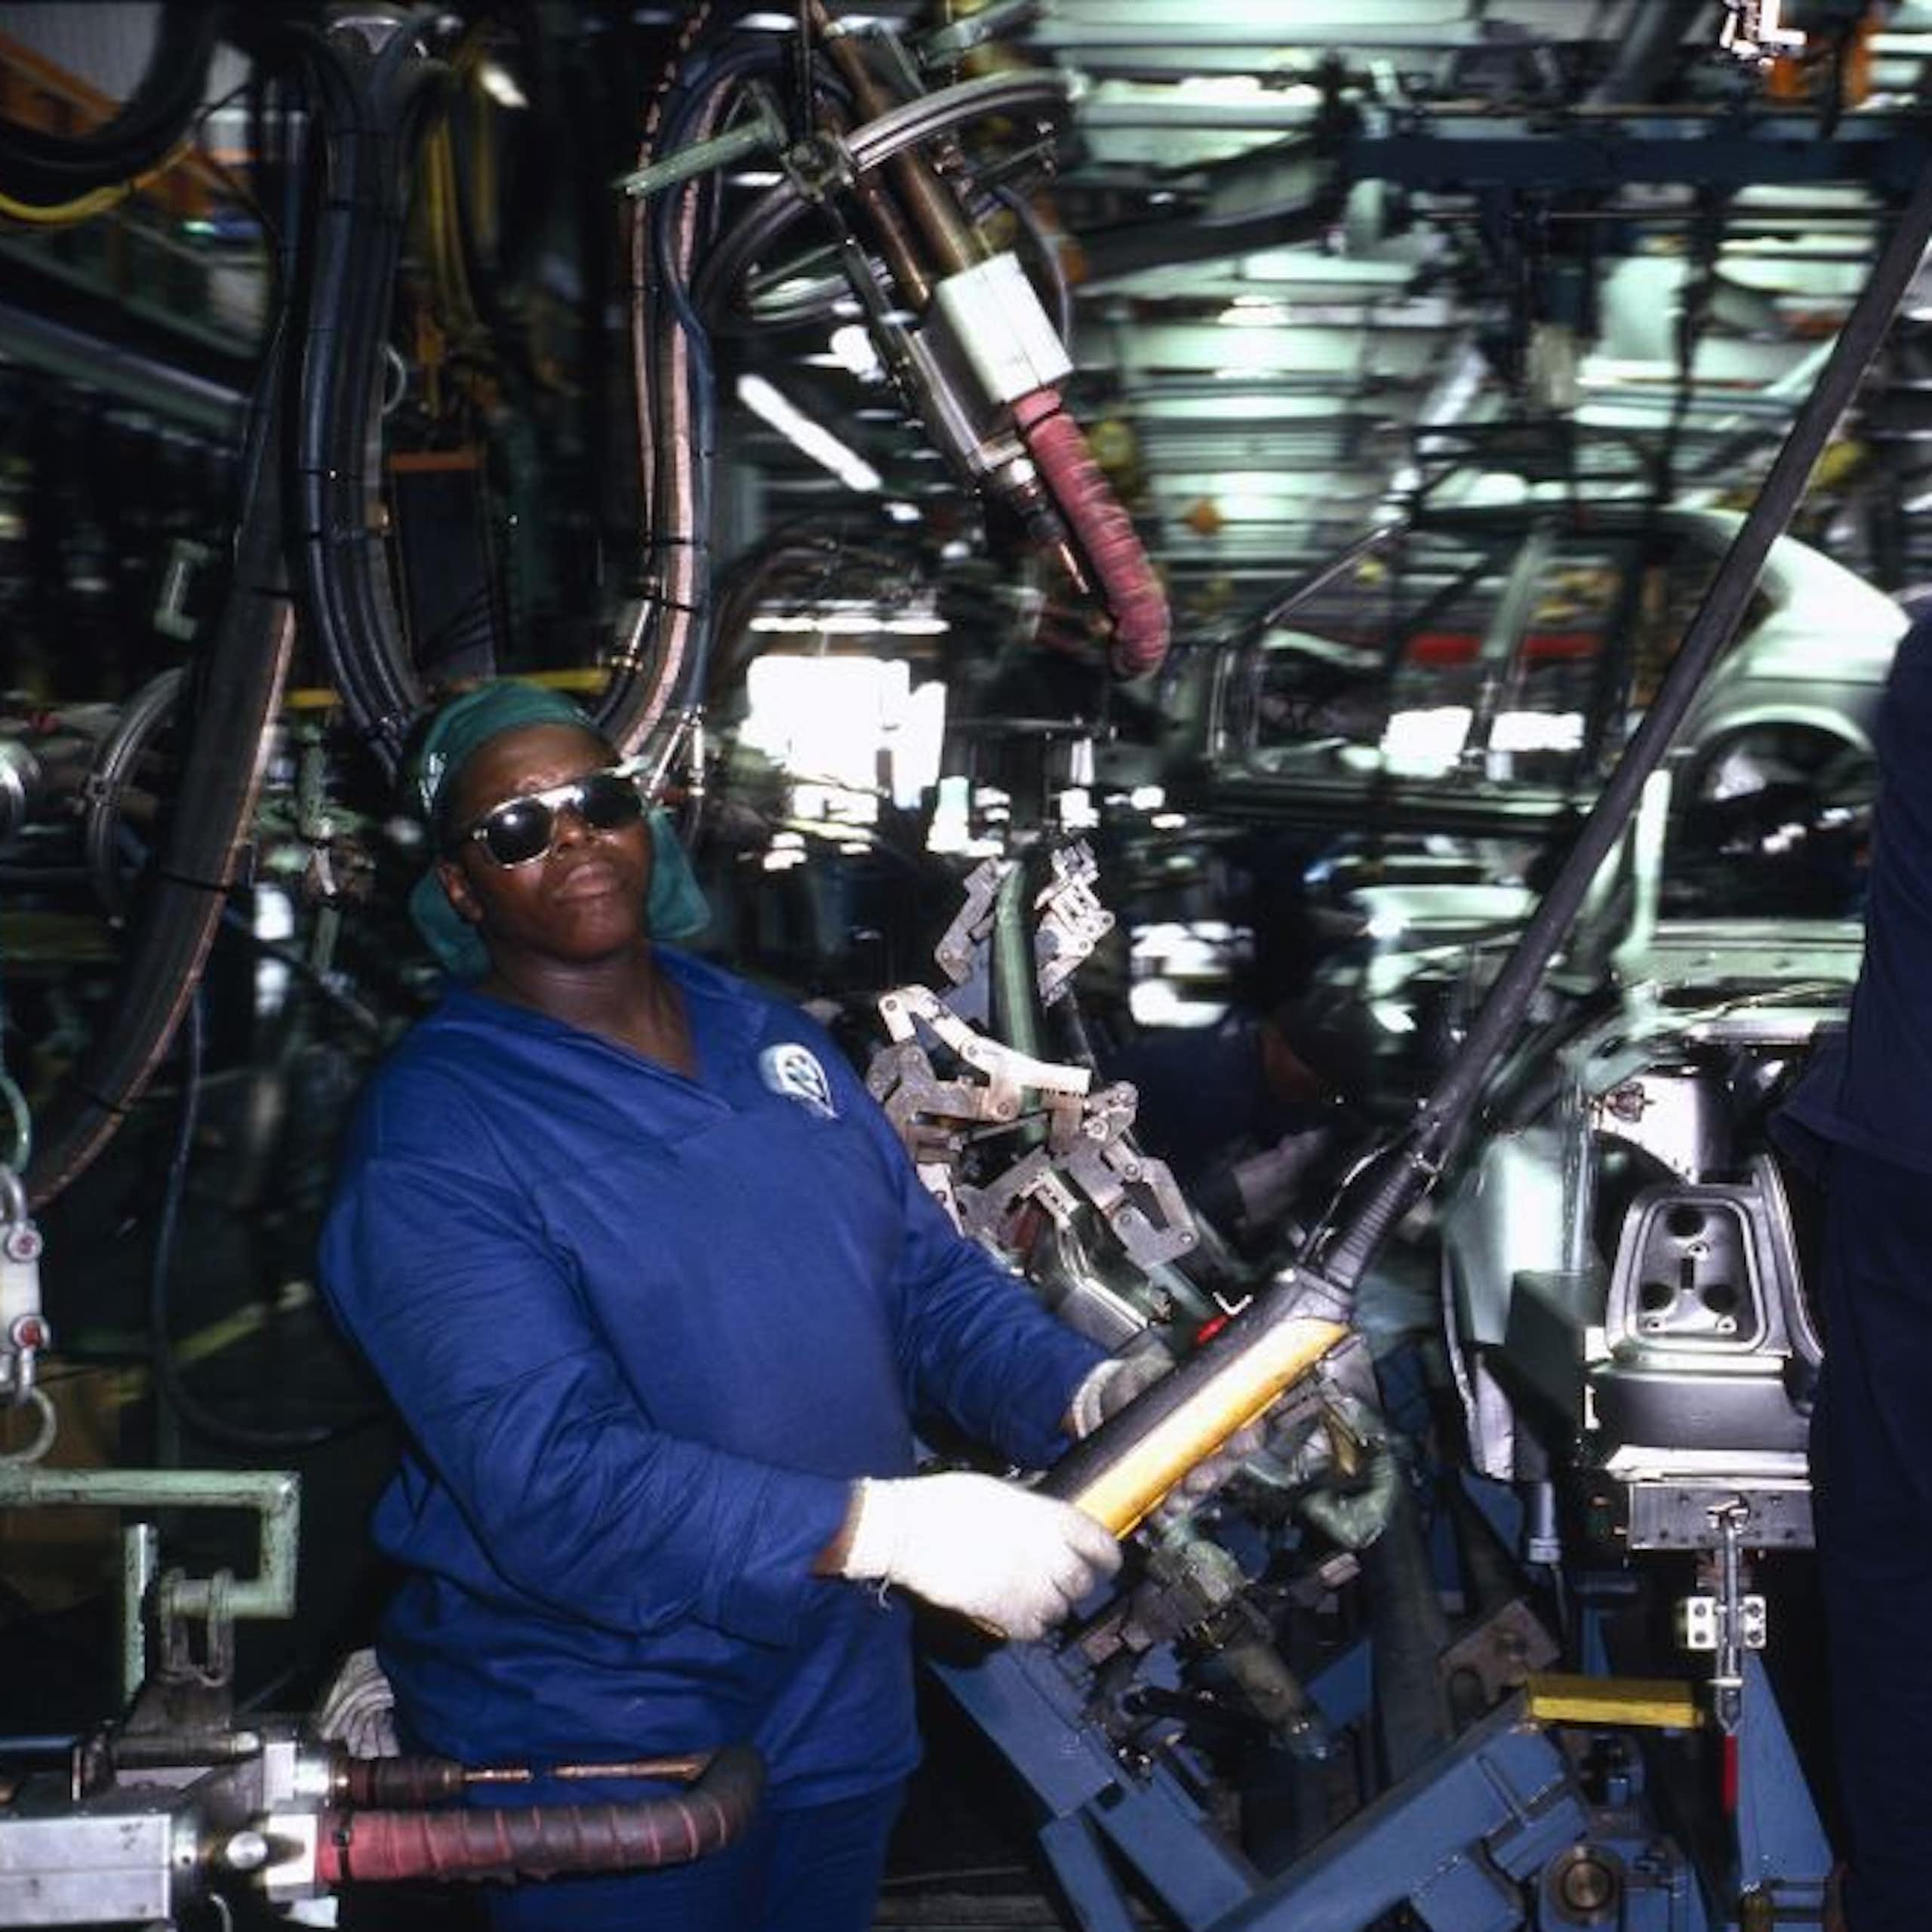 Men in blue overalls and protective glasses and gloves, amid machinery and the semi-built body of a vehicle